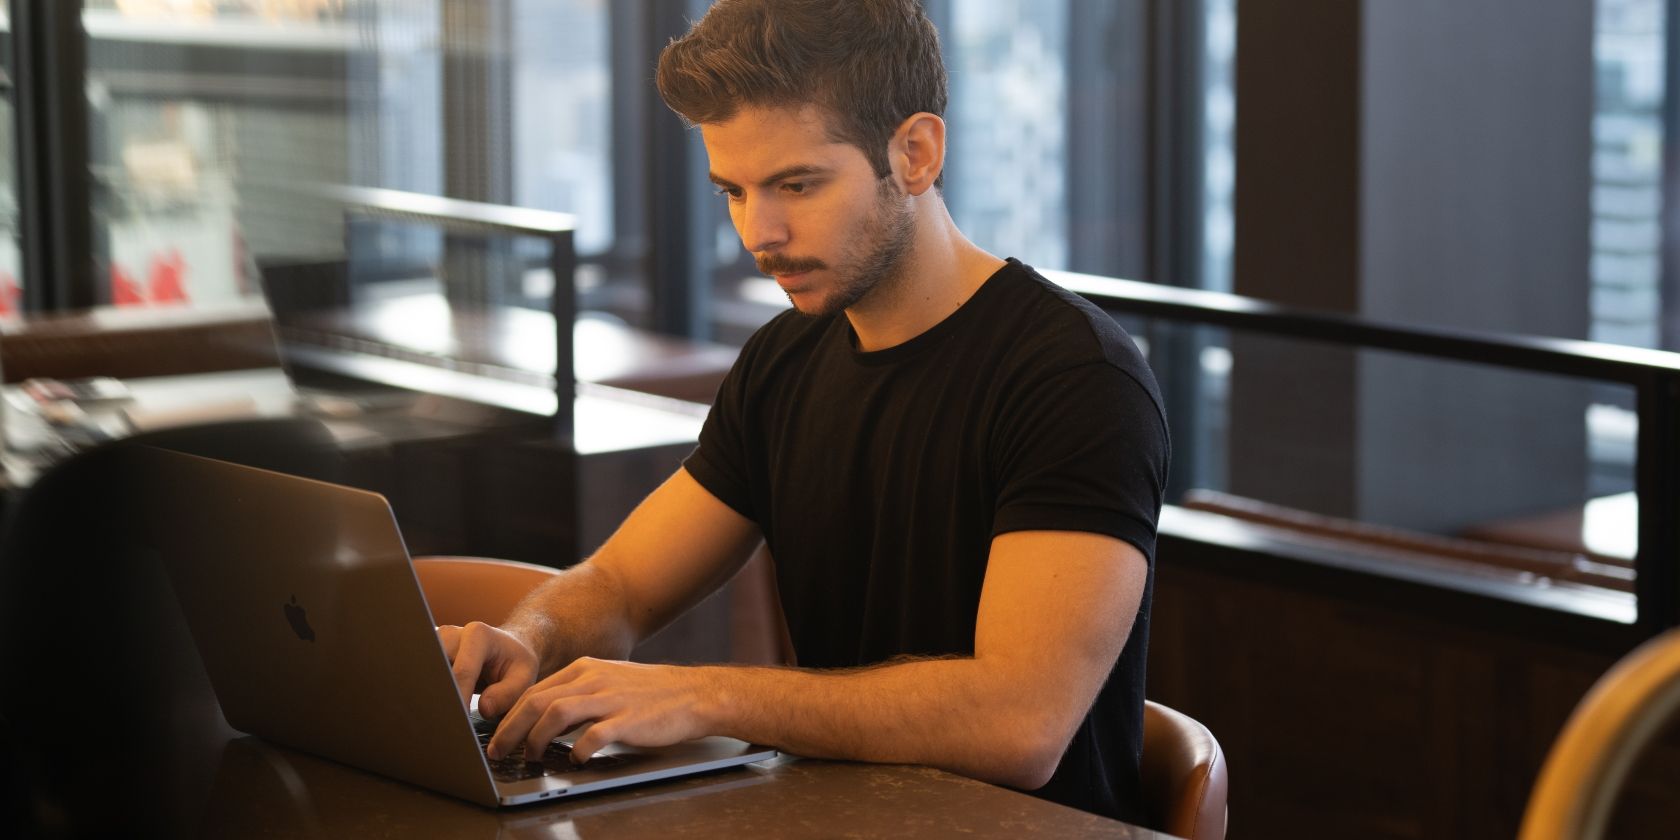 Man Using Laptop in Office Setting